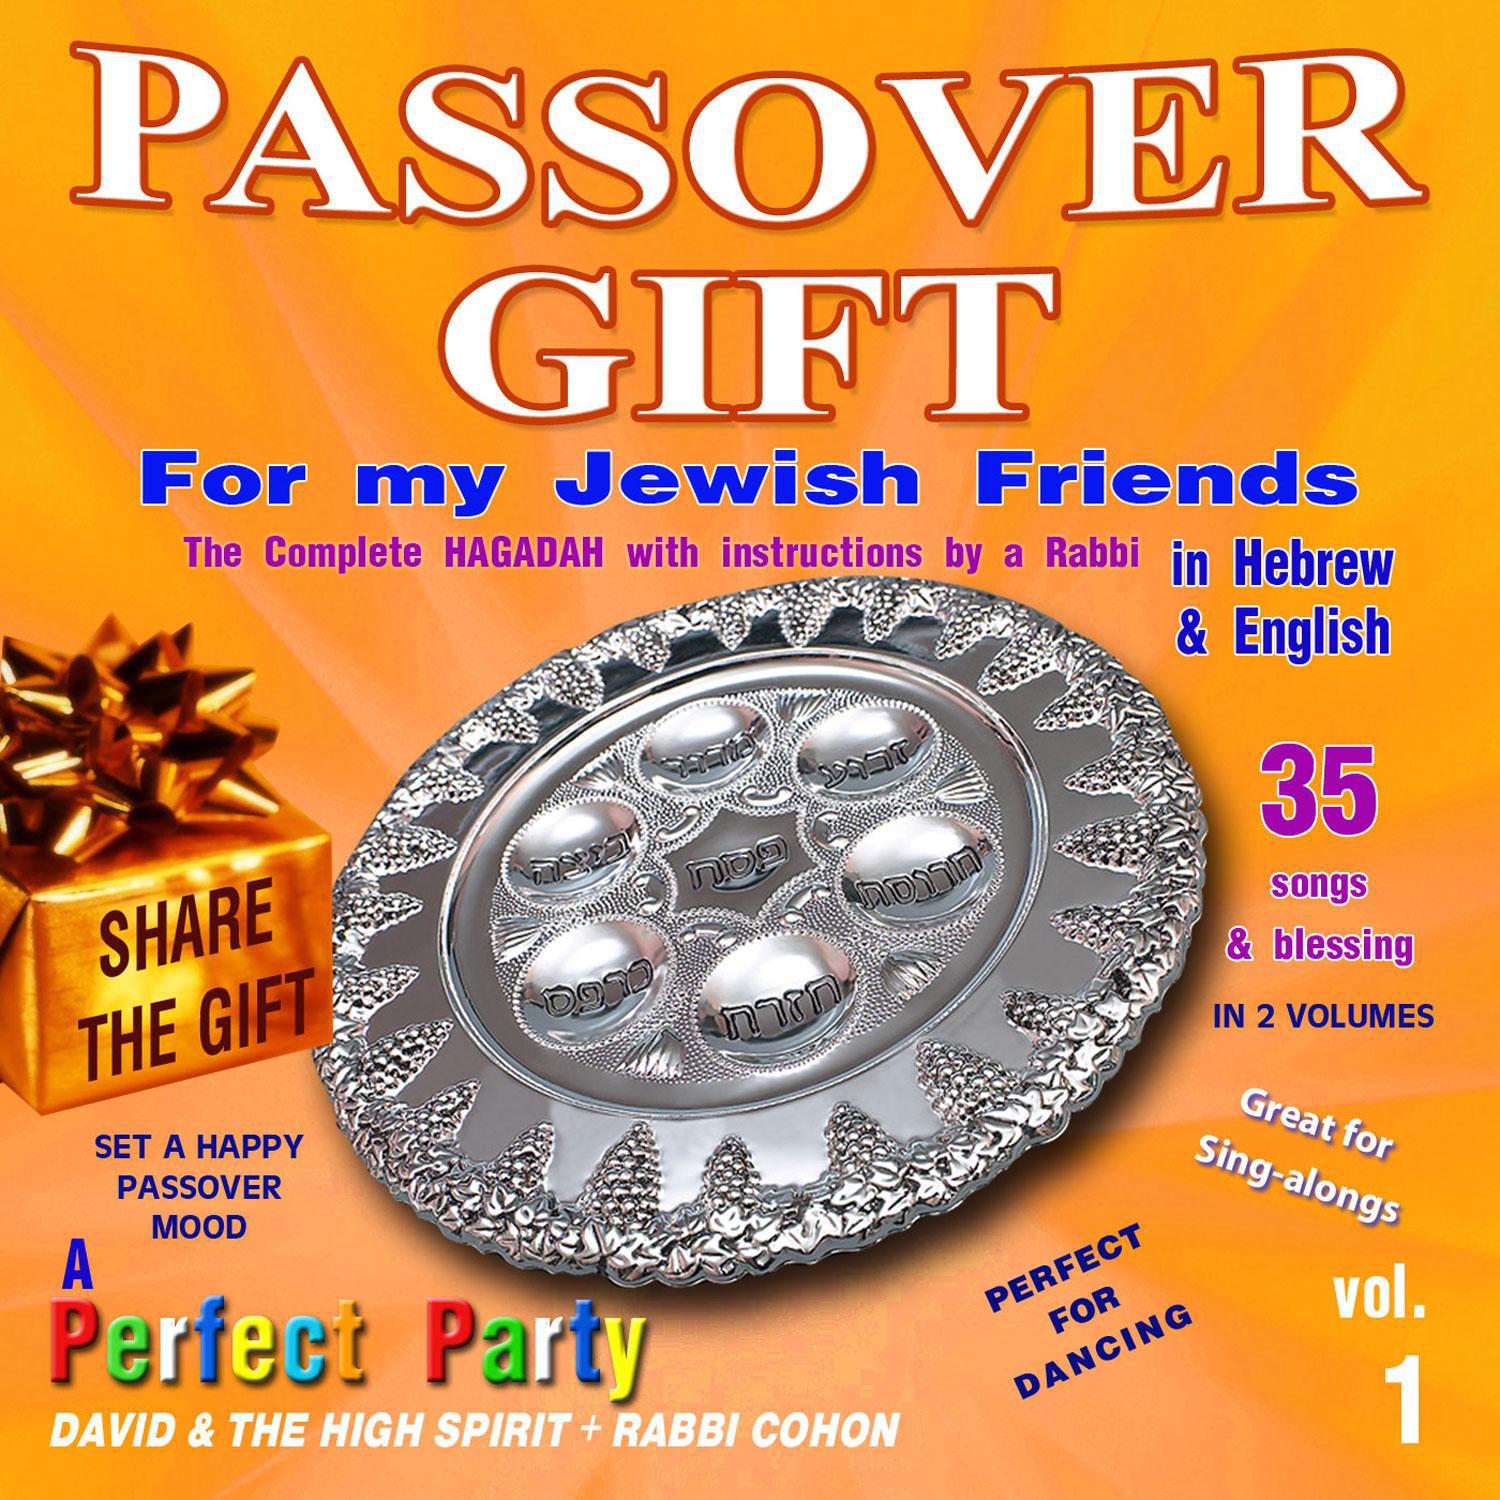 Passover Gift for My Jewish Friends, Vol. 1